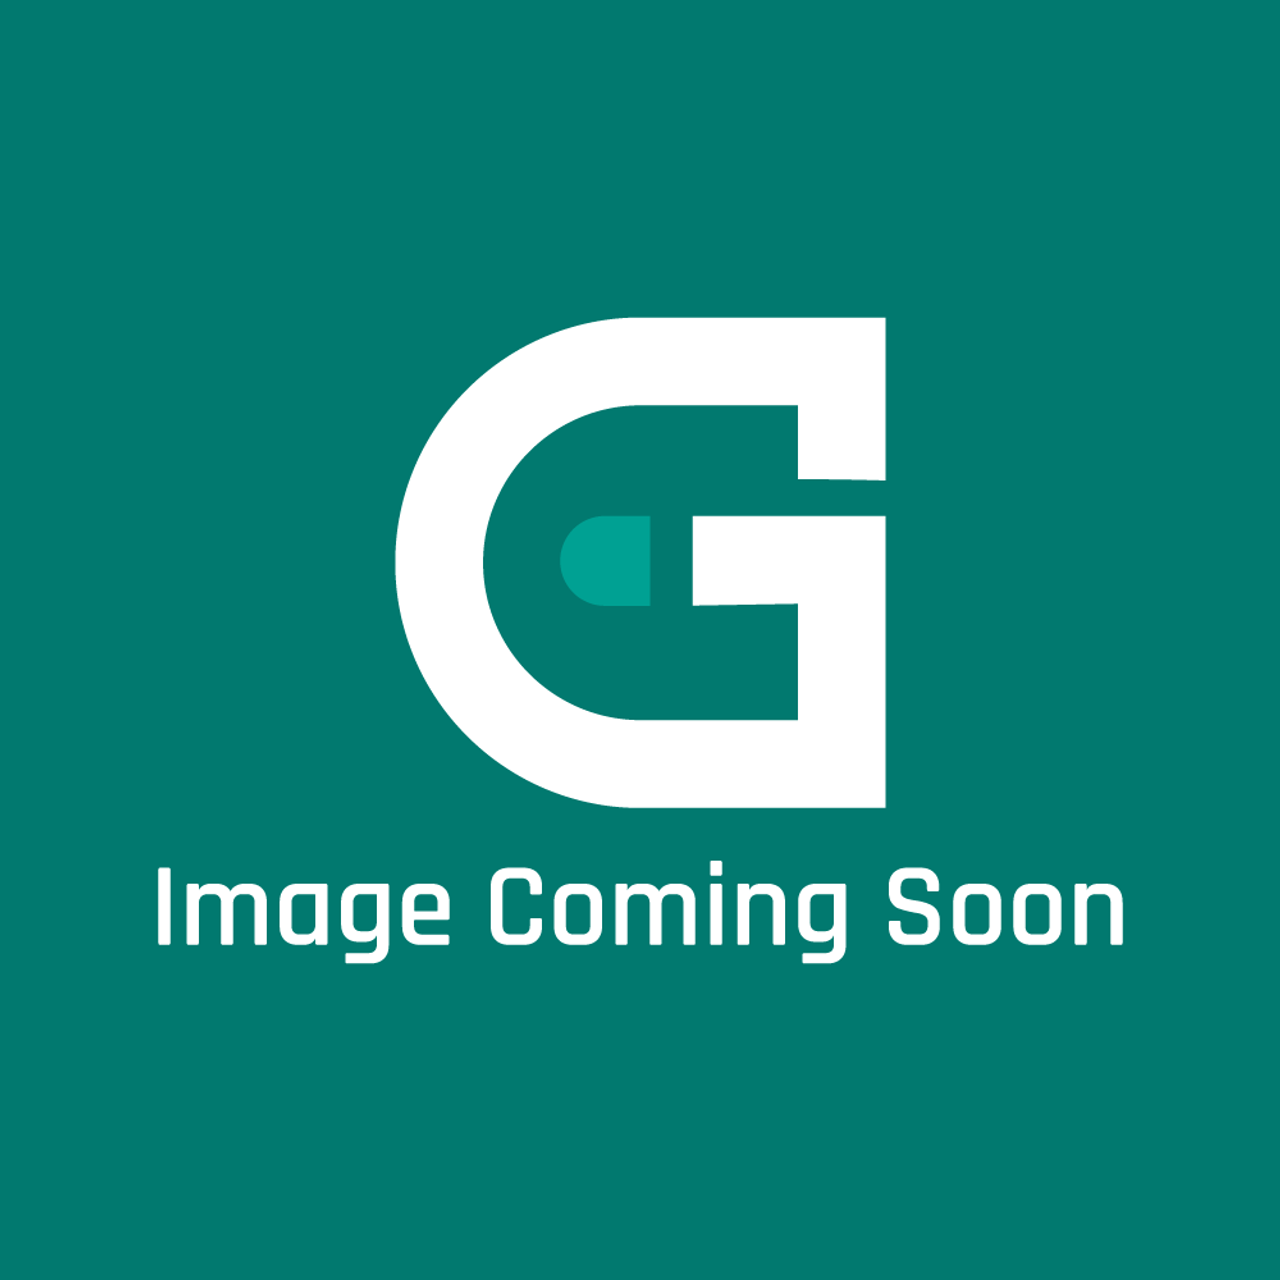 AGA Marvel R1896 - Riddling Connector (Rs5M4-16203D) Smf - Image Coming Soon!